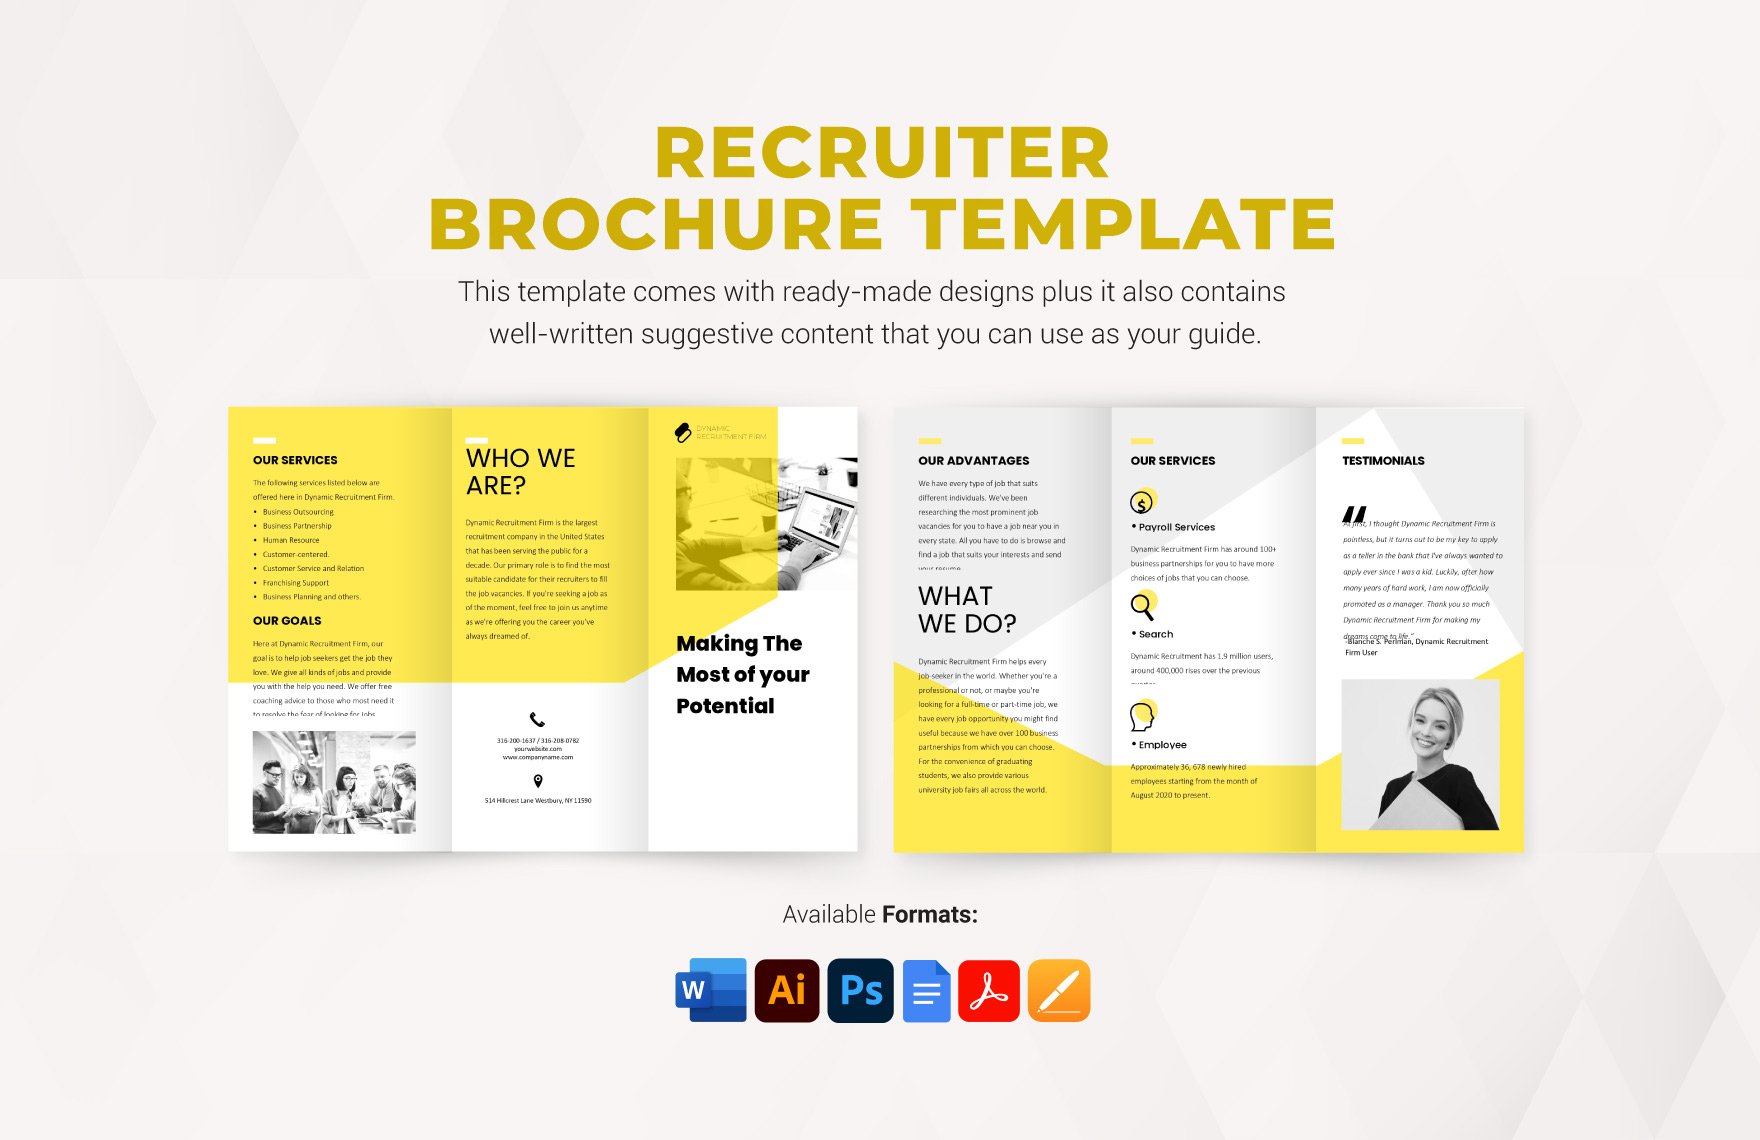 Free Recruiter Brochure Template in Word, Google Docs, PDF, Illustrator, PSD, Apple Pages